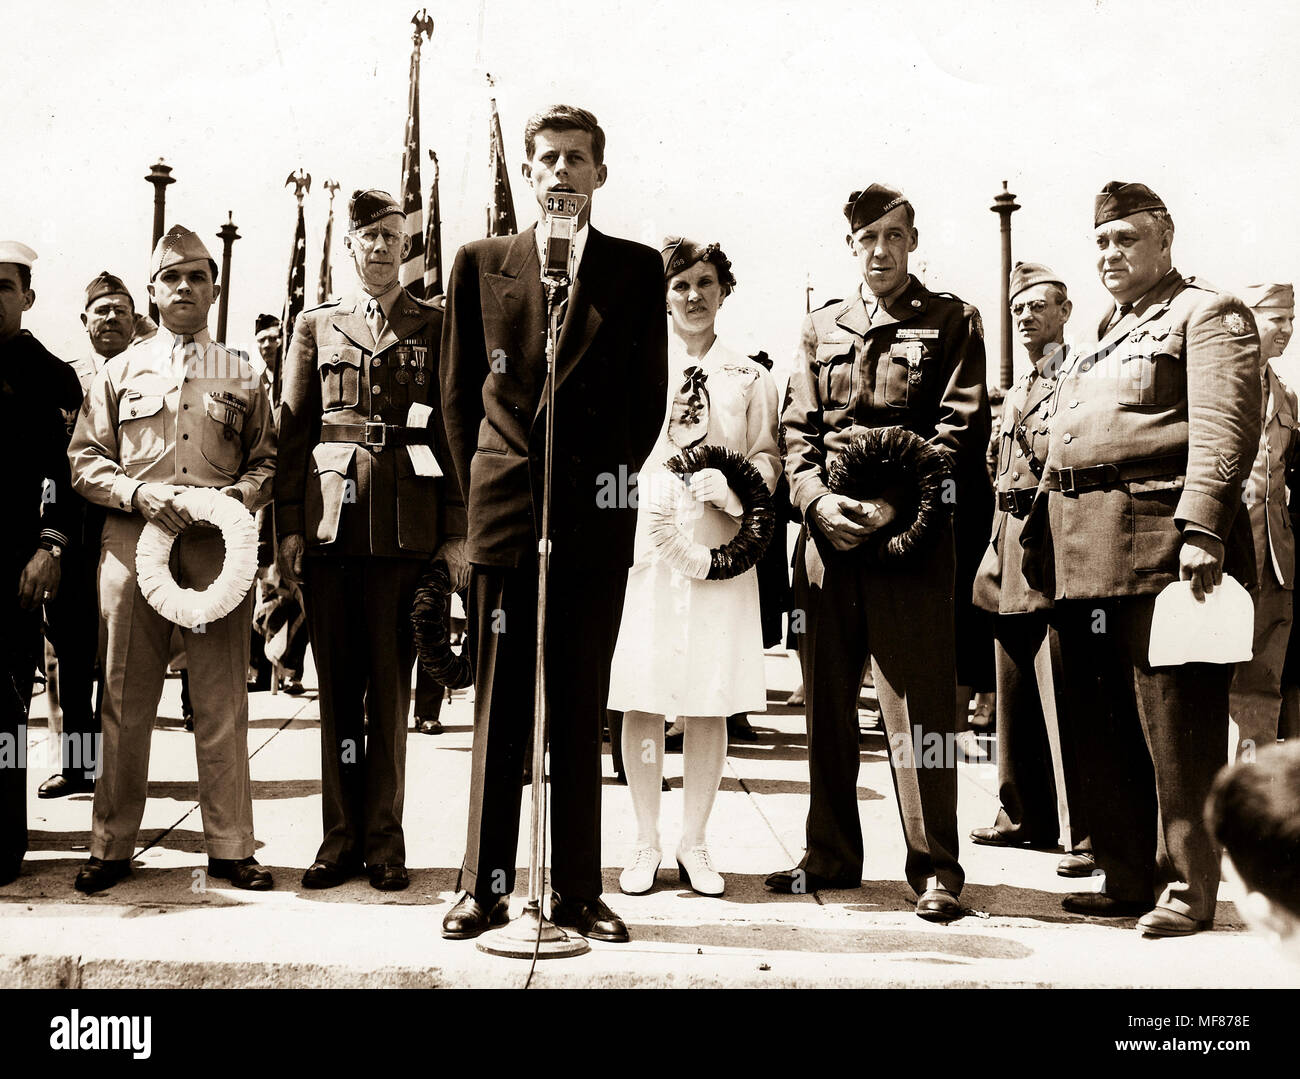 PC 360  30 May 1946 John F. Kennedy speaks at Memorial Day services in Cambridge, Massachusetts.  Please credit 'John Fitzgerald Kennedy Library, Boston' for the image. Stock Photo